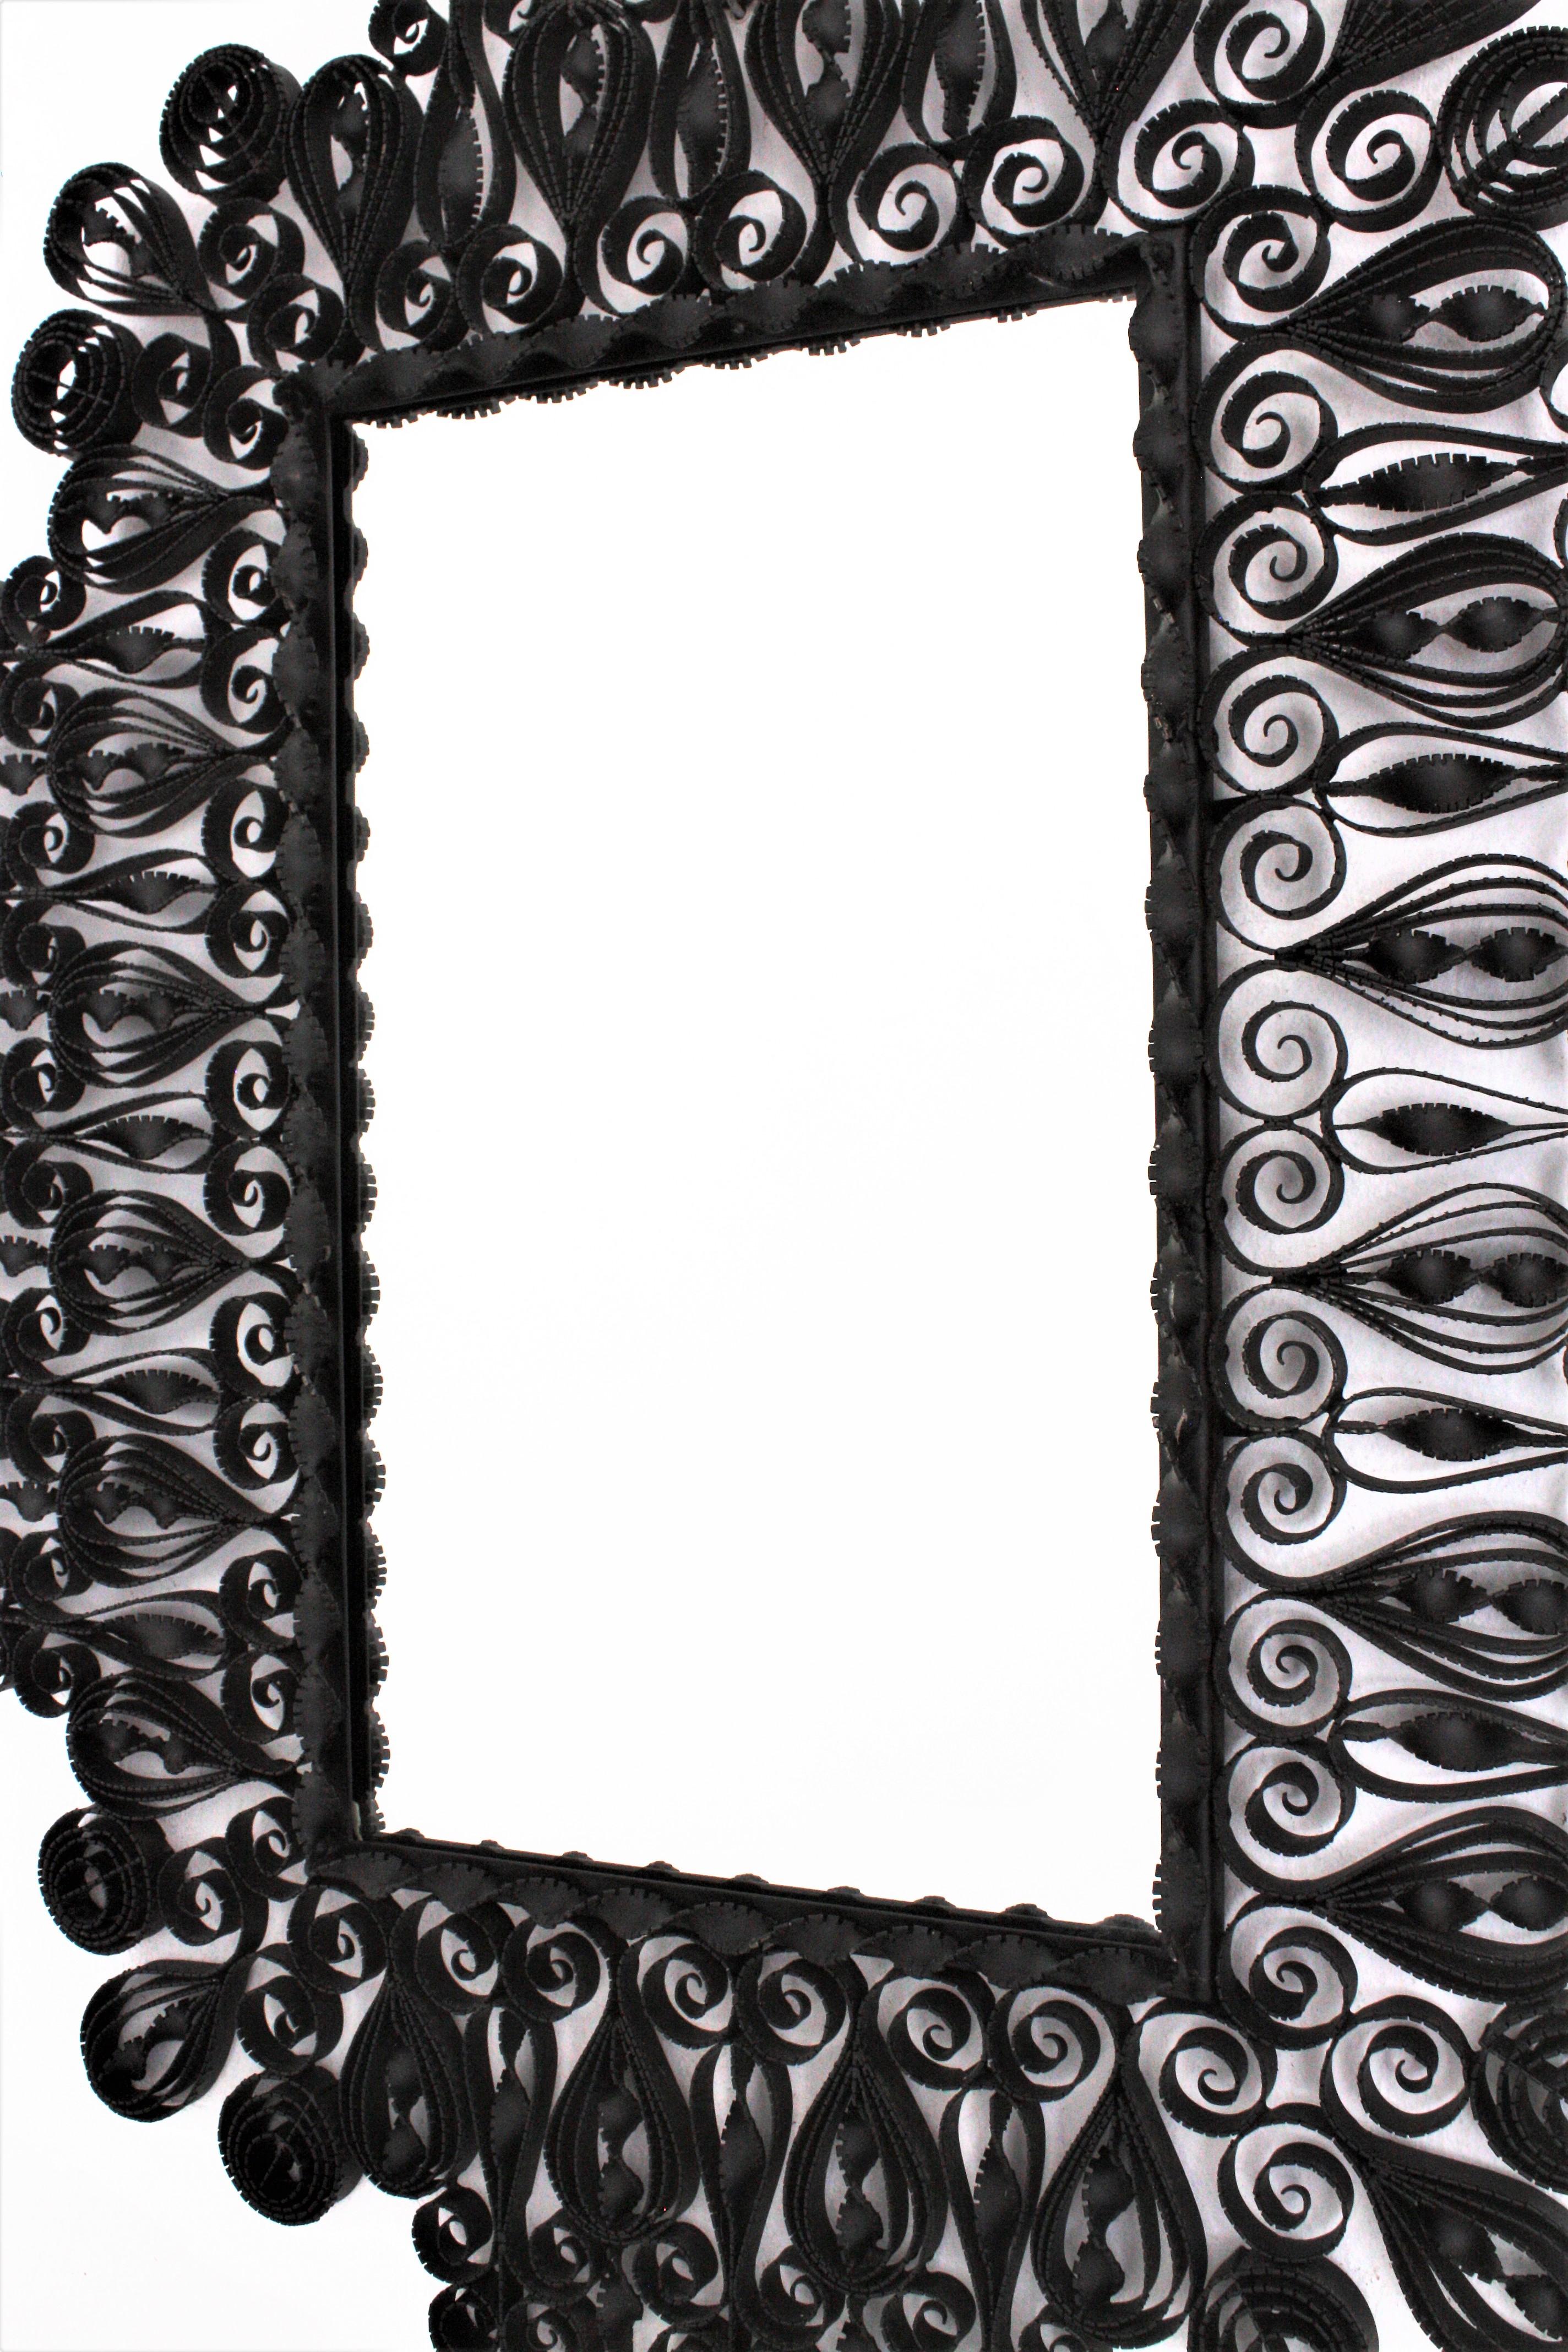 Hammered Gothic Revival Wrought Iron Mirror with Scroll and Twisting Frame, Spain, 1940s